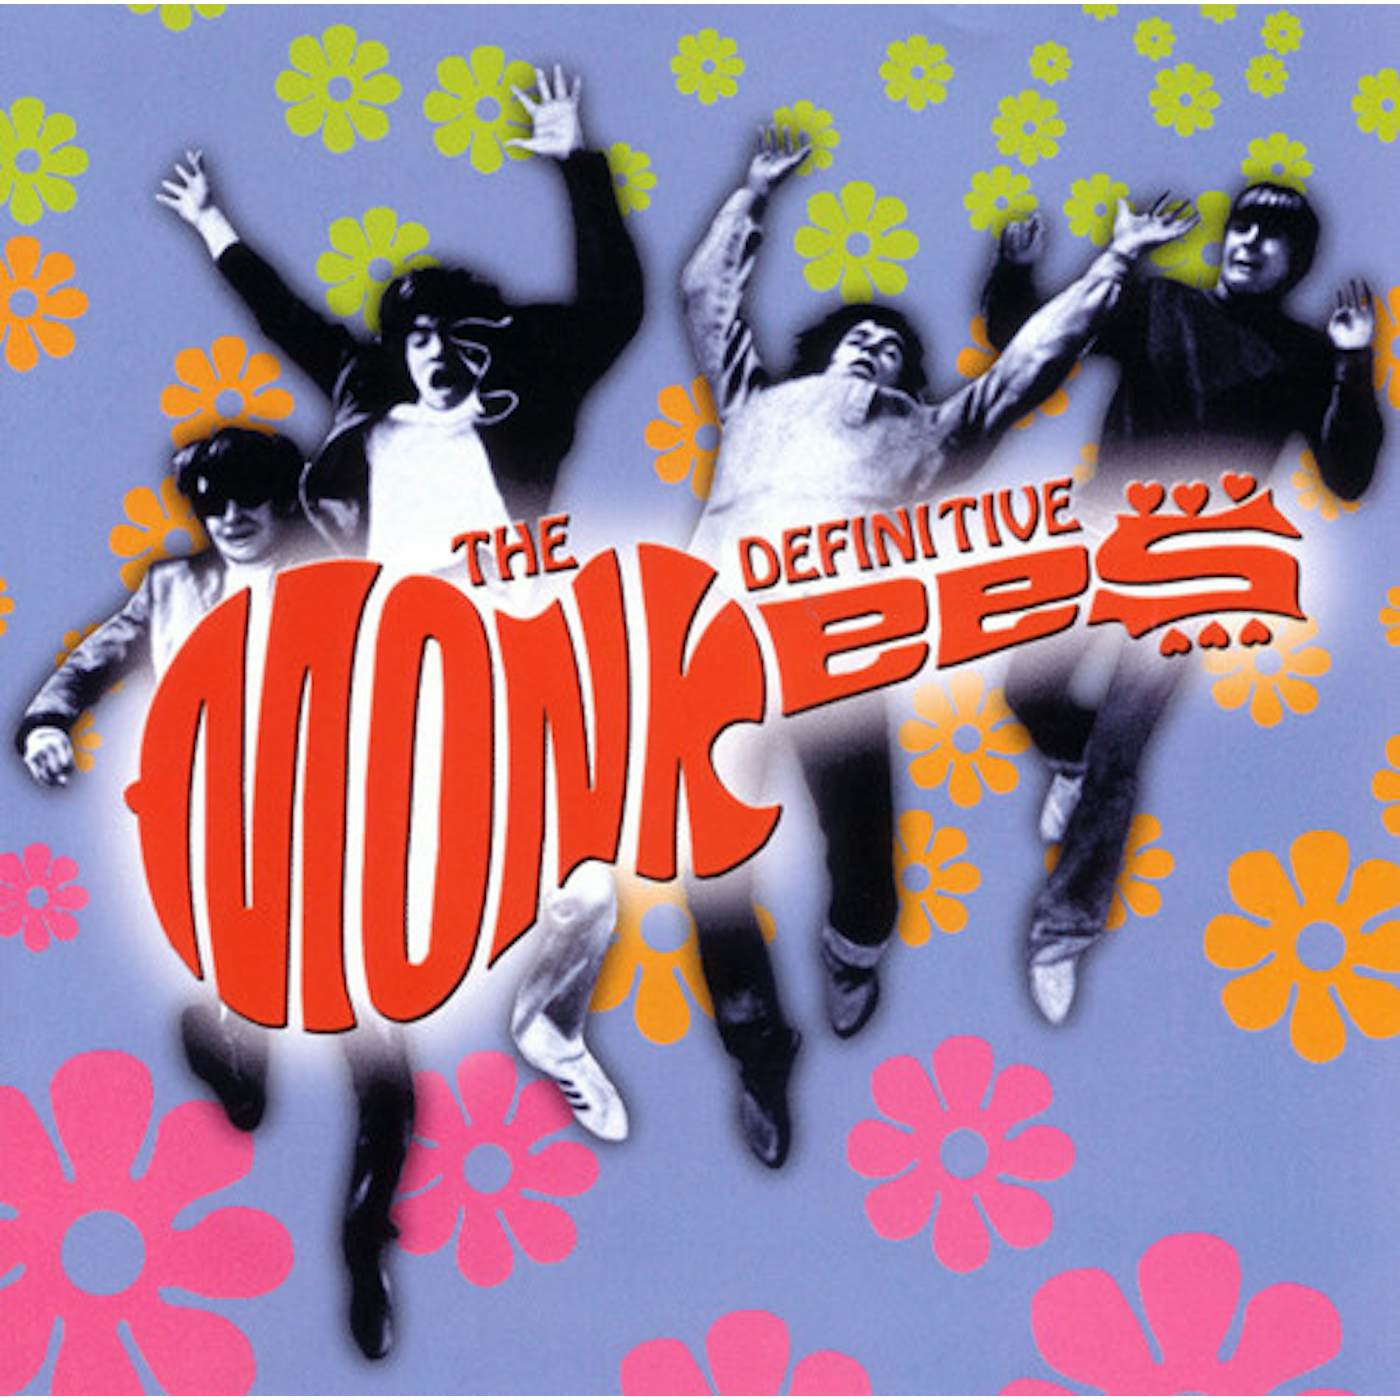 DEFINITIVE The Monkees CD